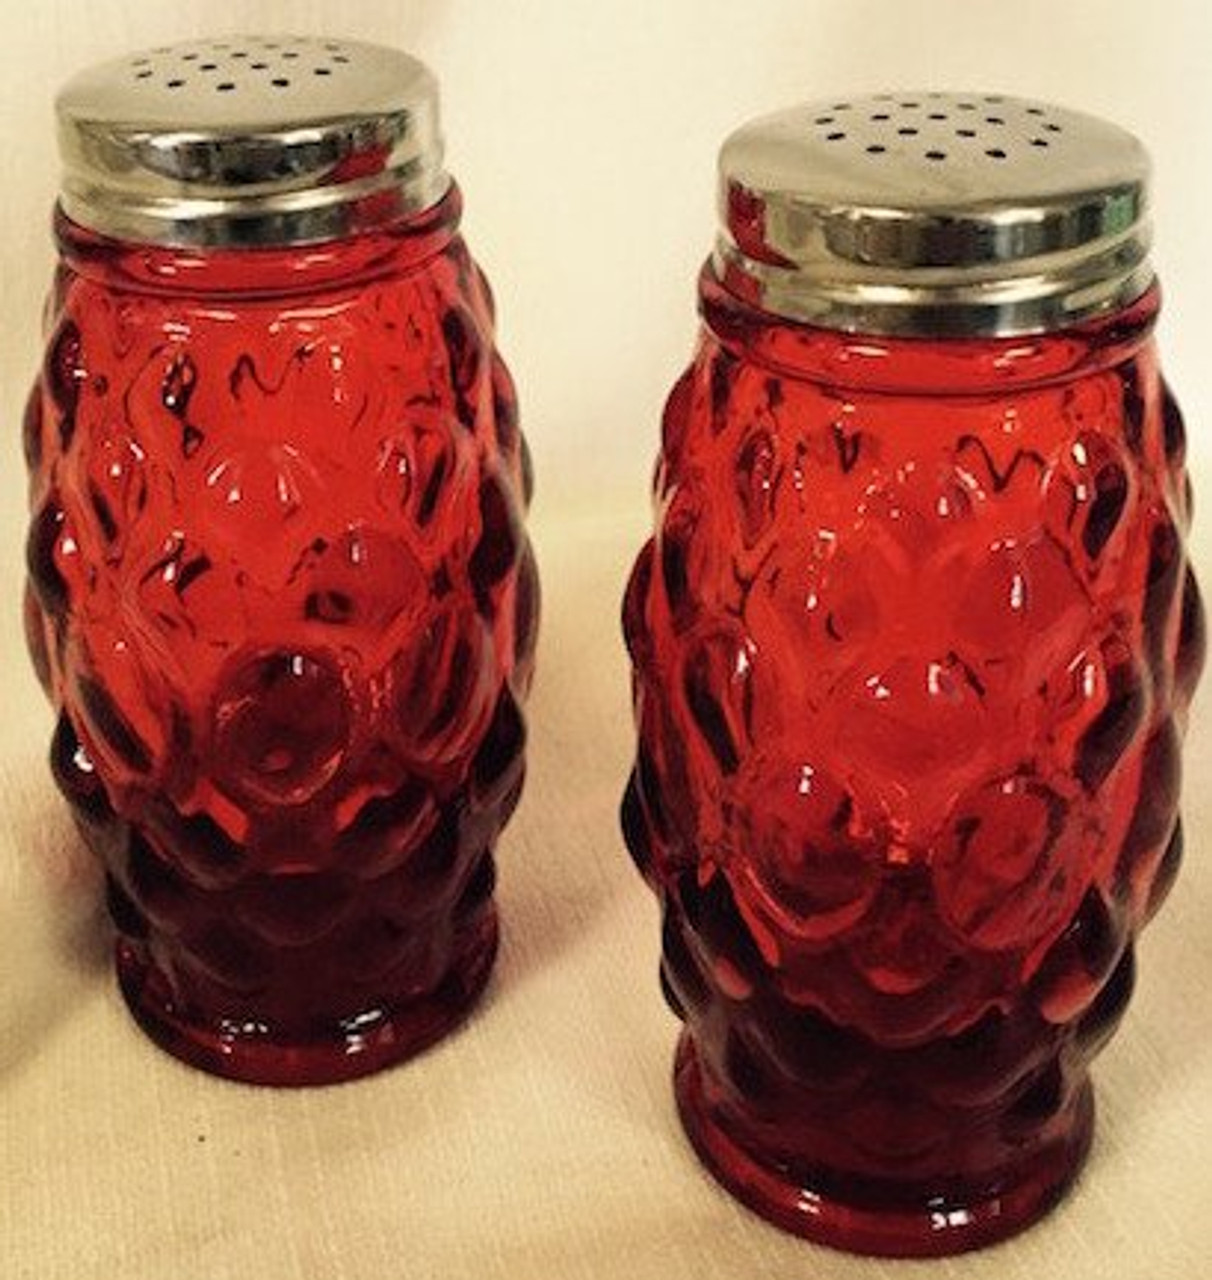 Mosser Glass Elizabeth Collection Salt and Pepper Shakers - Red- Set of 2 (MG 234SPR) 